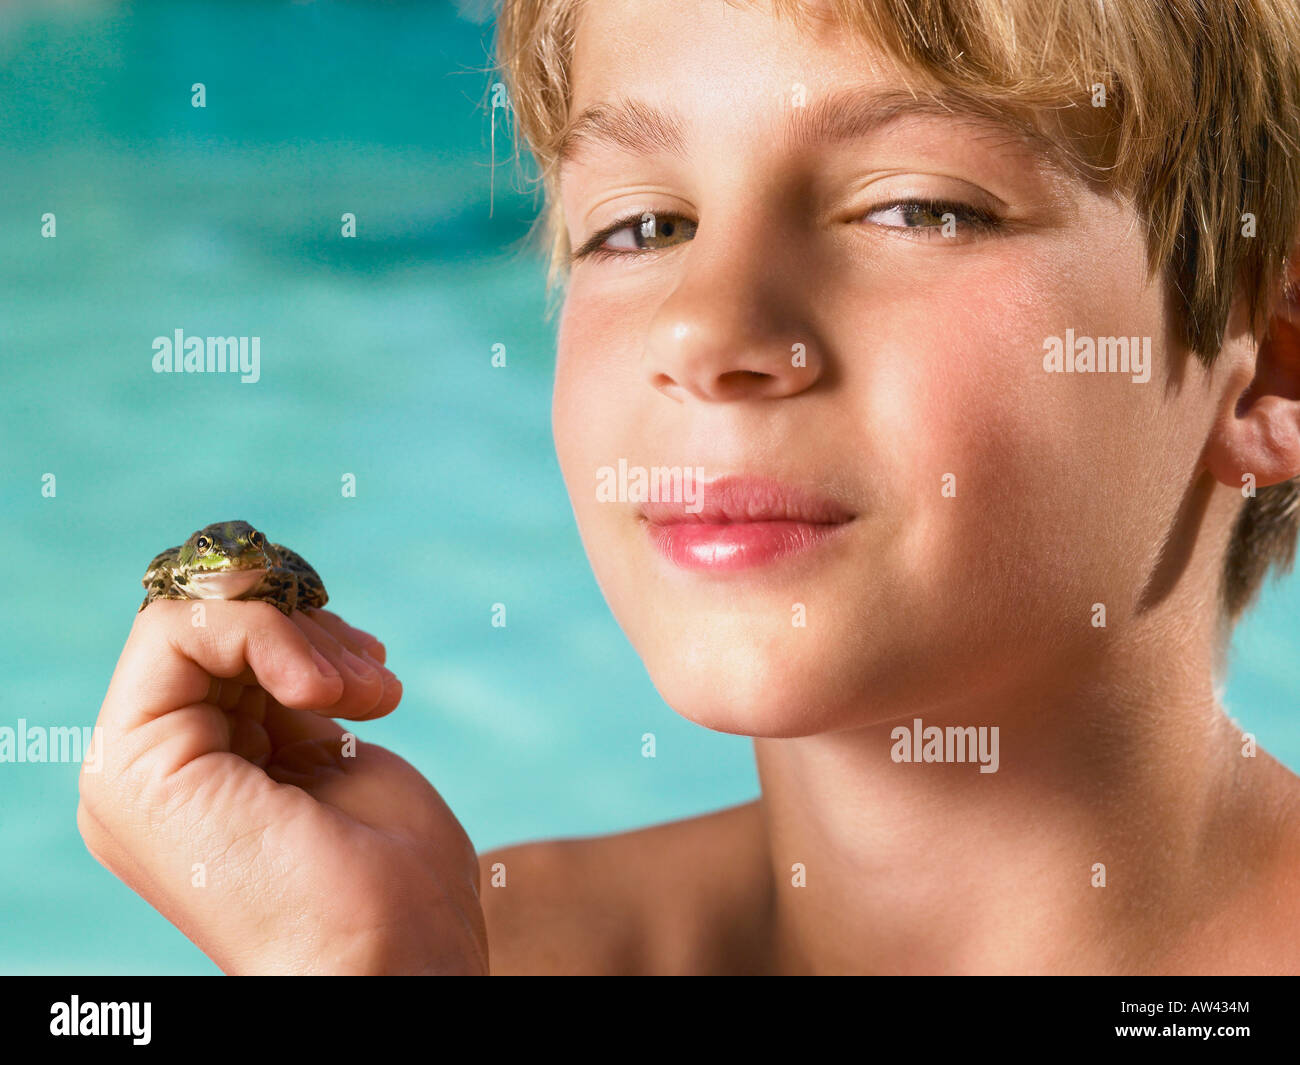 Boy holding a frog in his hand. Stock Photo